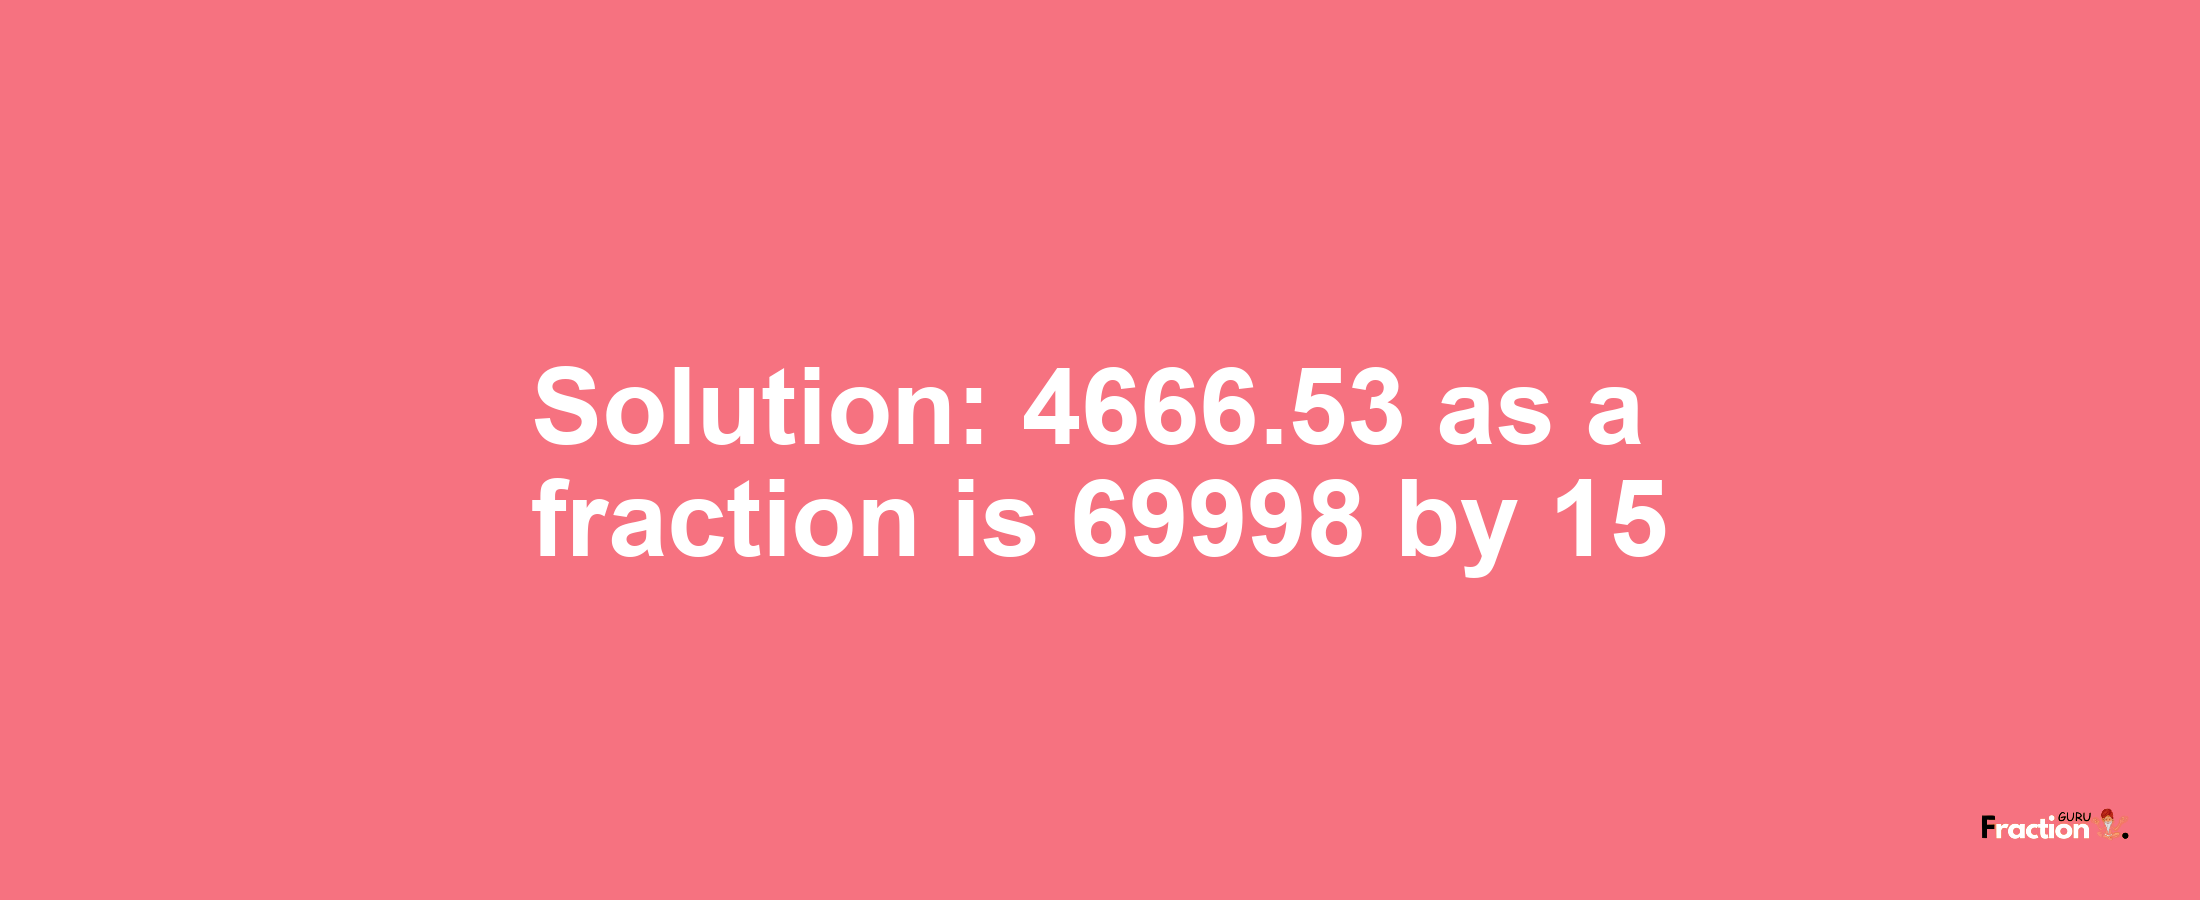 Solution:4666.53 as a fraction is 69998/15